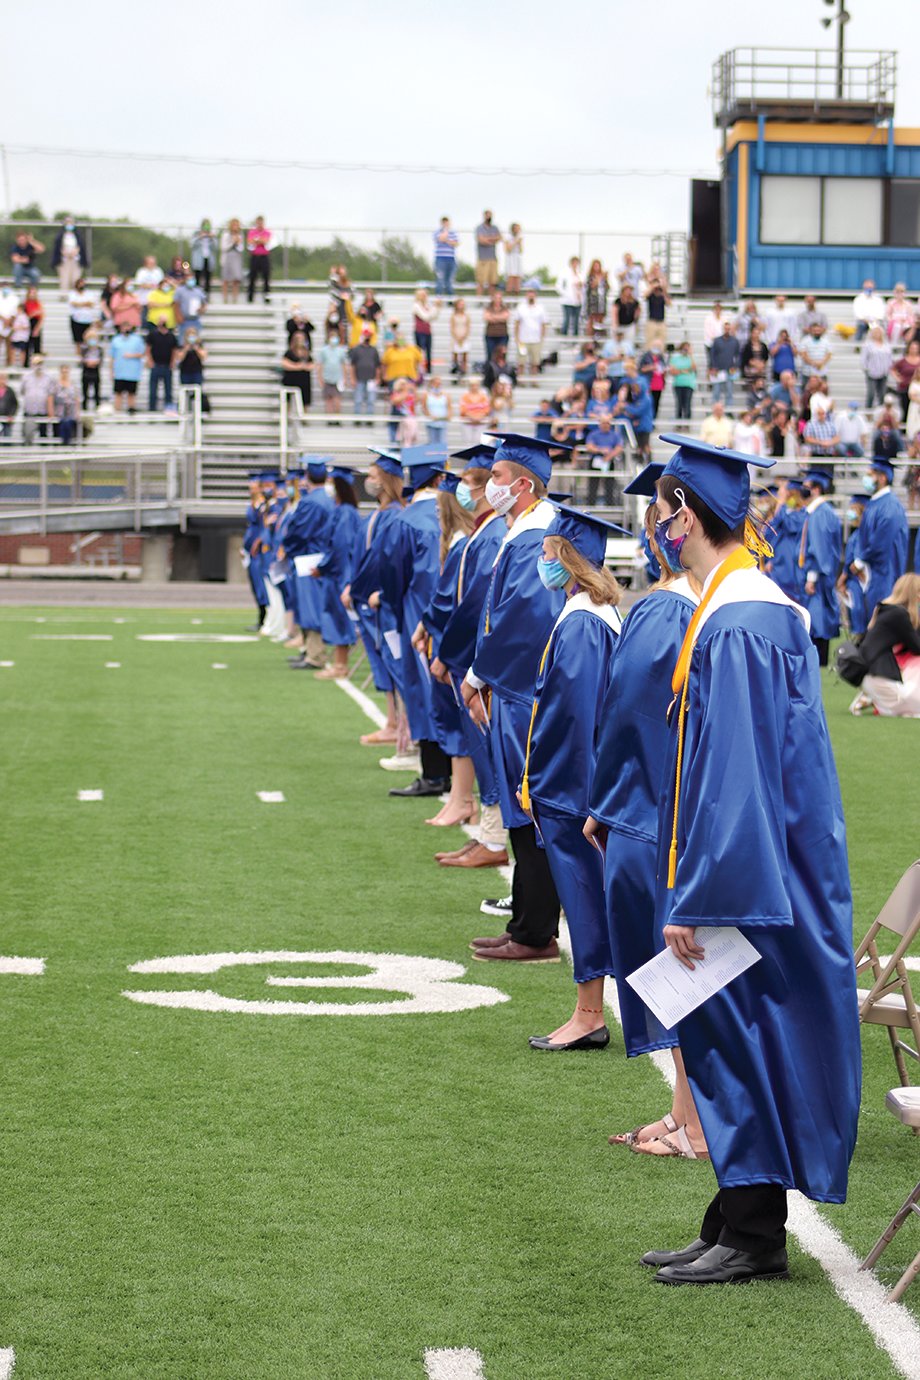 Spaced for social distancing, the front row of Crawfordsville graduates eagerly await their diplomas.